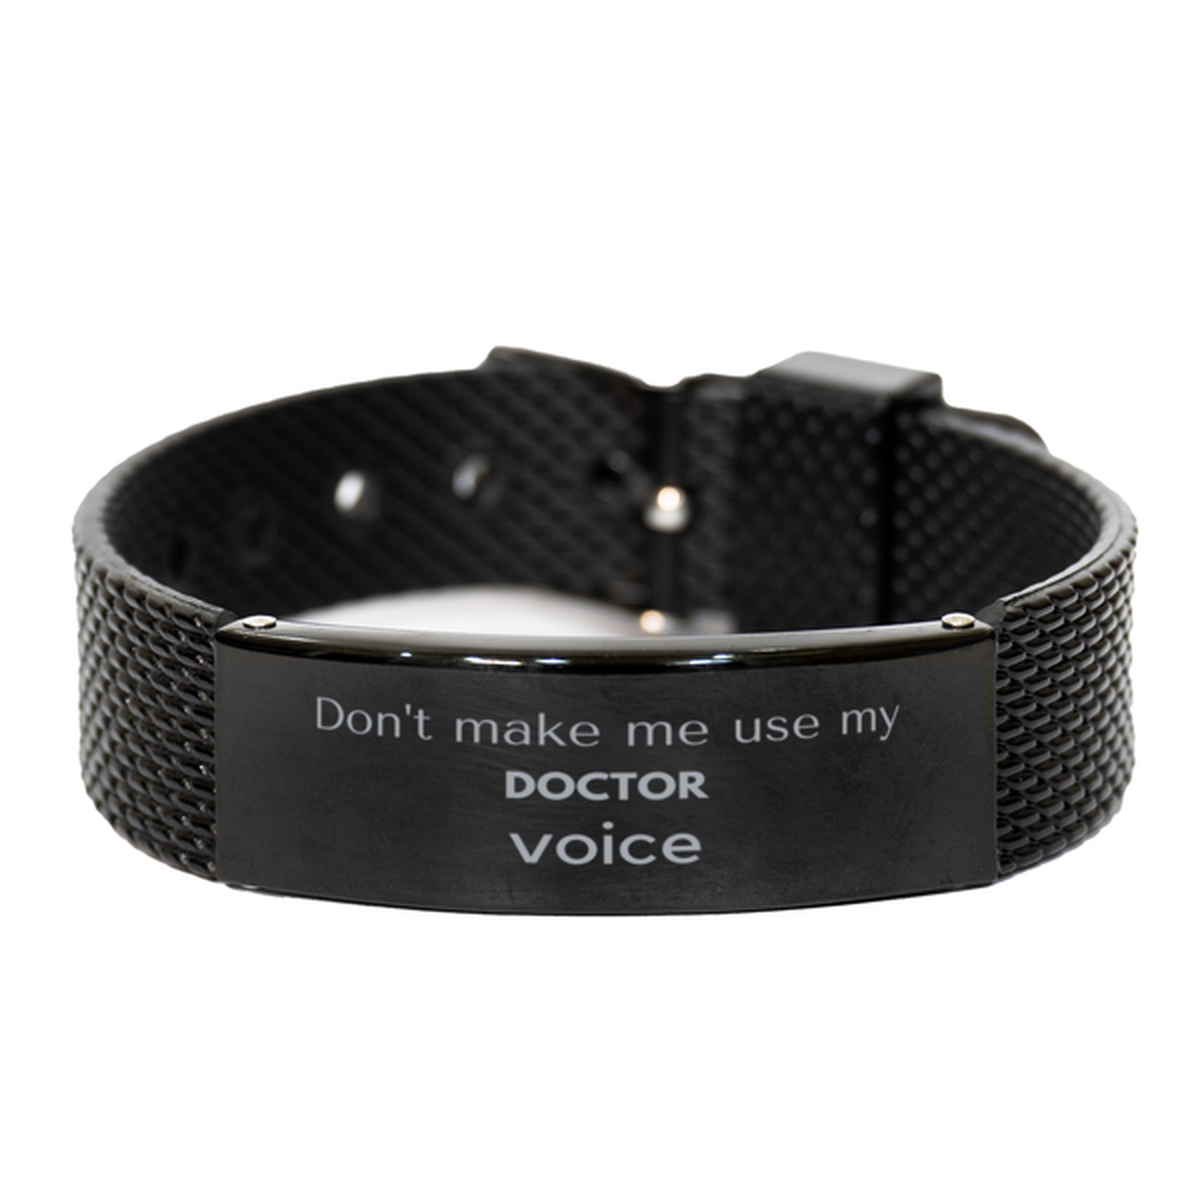 Don't make me use my Doctor voice, Sarcasm Doctor Gifts, Christmas Doctor Black Shark Mesh Bracelet Birthday Unique Gifts For Doctor Coworkers, Men, Women, Colleague, Friends